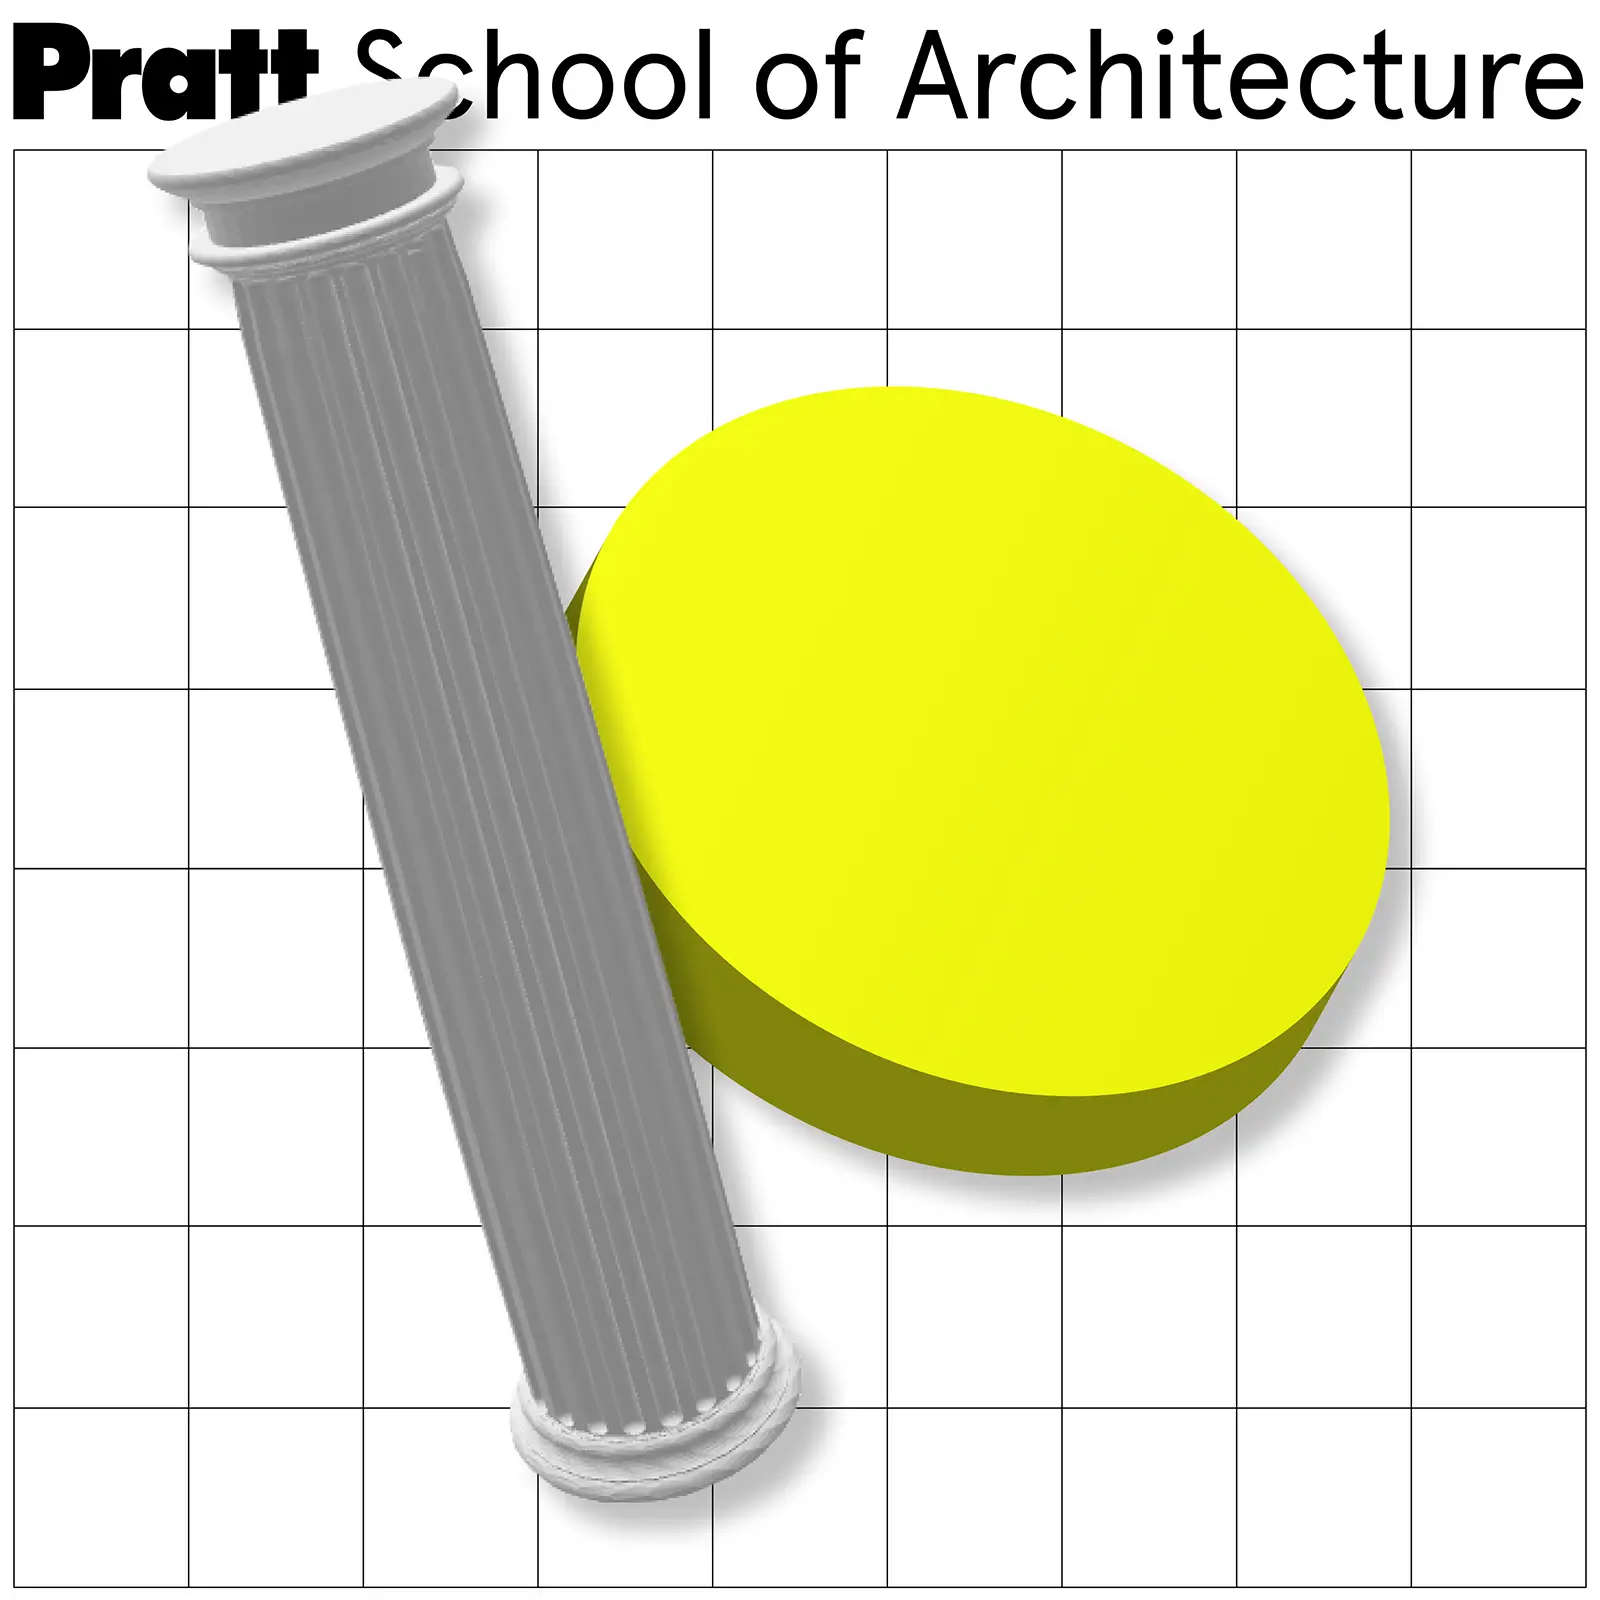 link card for the project Pratt School of Architecture showing 3D objects floating over a square grid and the logo